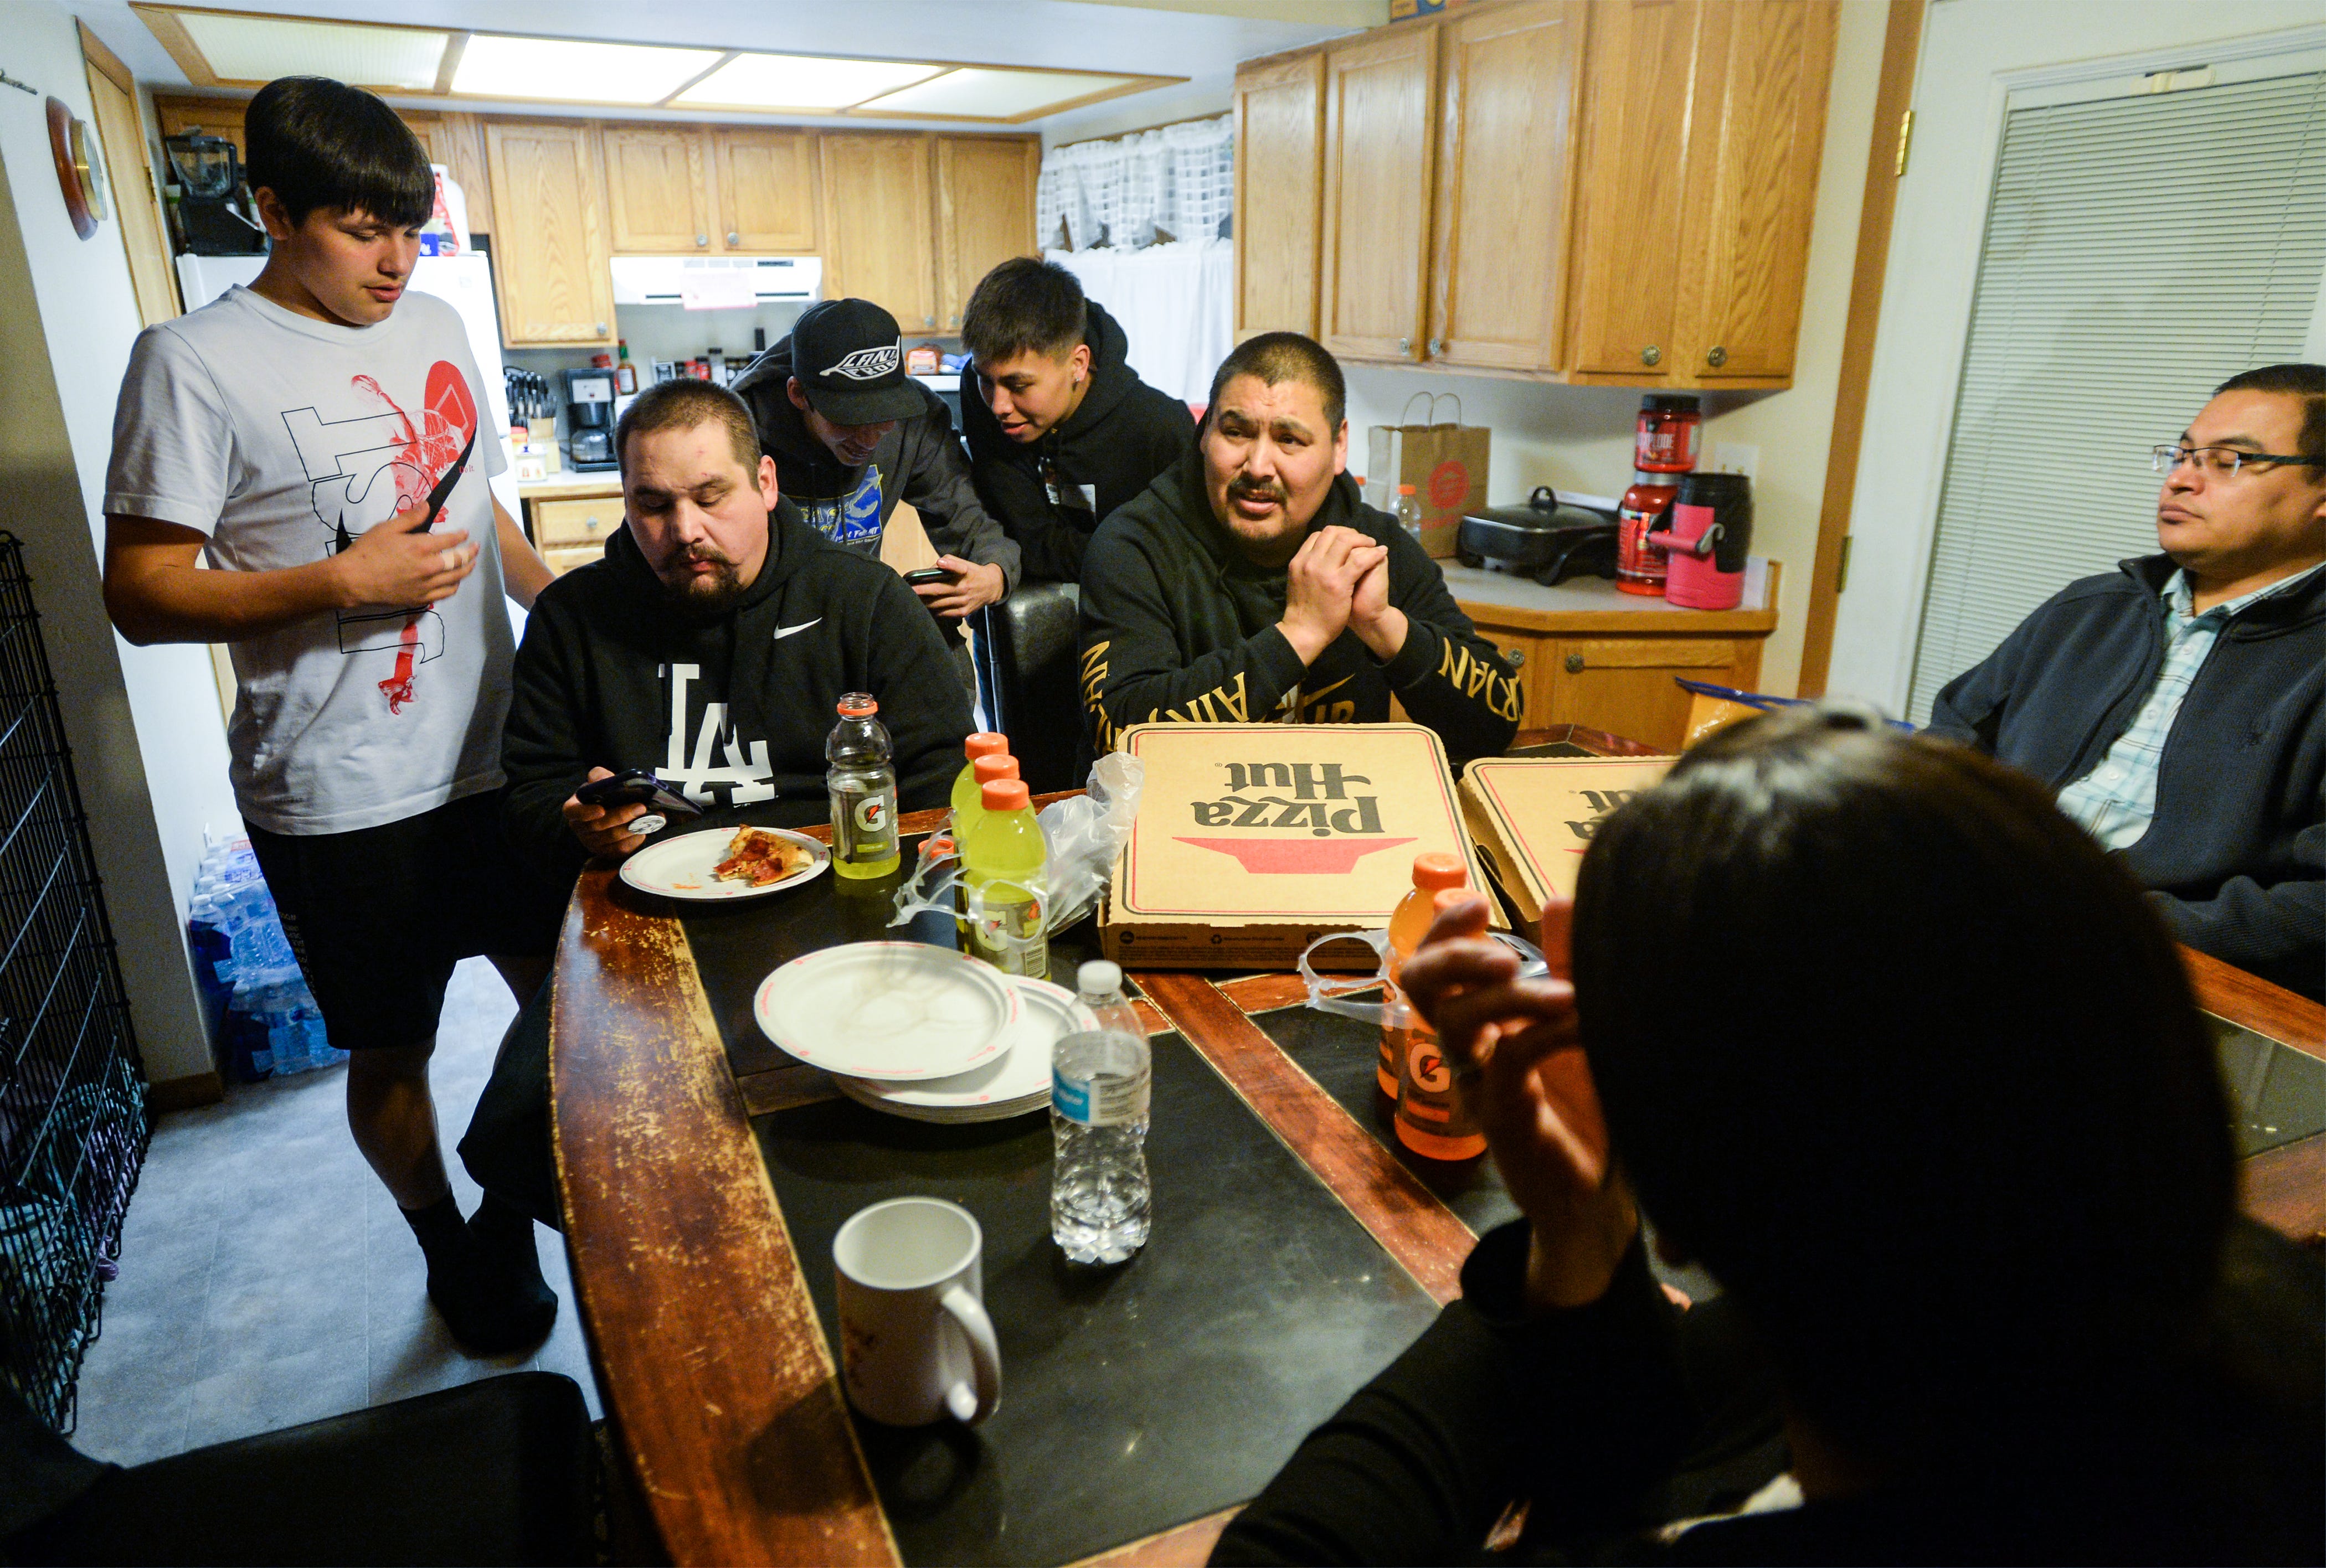 Rocky Boy boys' basketball coach Adam Demontiney hosts pizza dinners at his home before big tournaments to get the team together away from the basketball court.